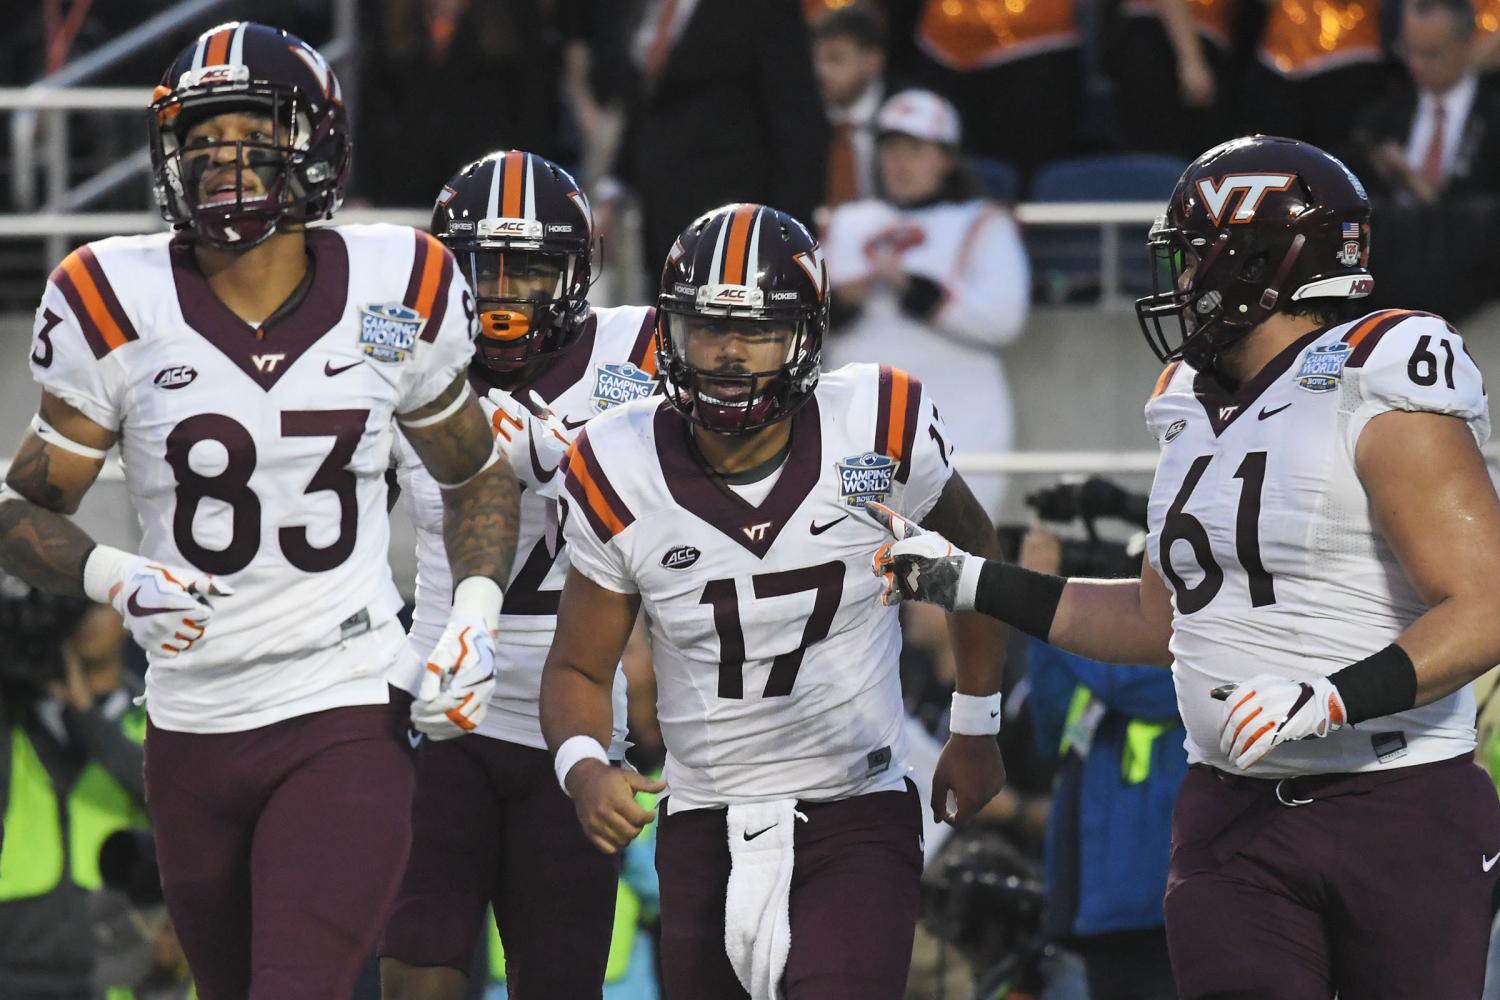 Virginia Tech vs. Oklahoma State Bowl Game Lakota East Spark Bowl Guide 2017 - 2018 Lakota East Spark Newsmagazine Game Recap by Lucas Fields Photography Used With Permission